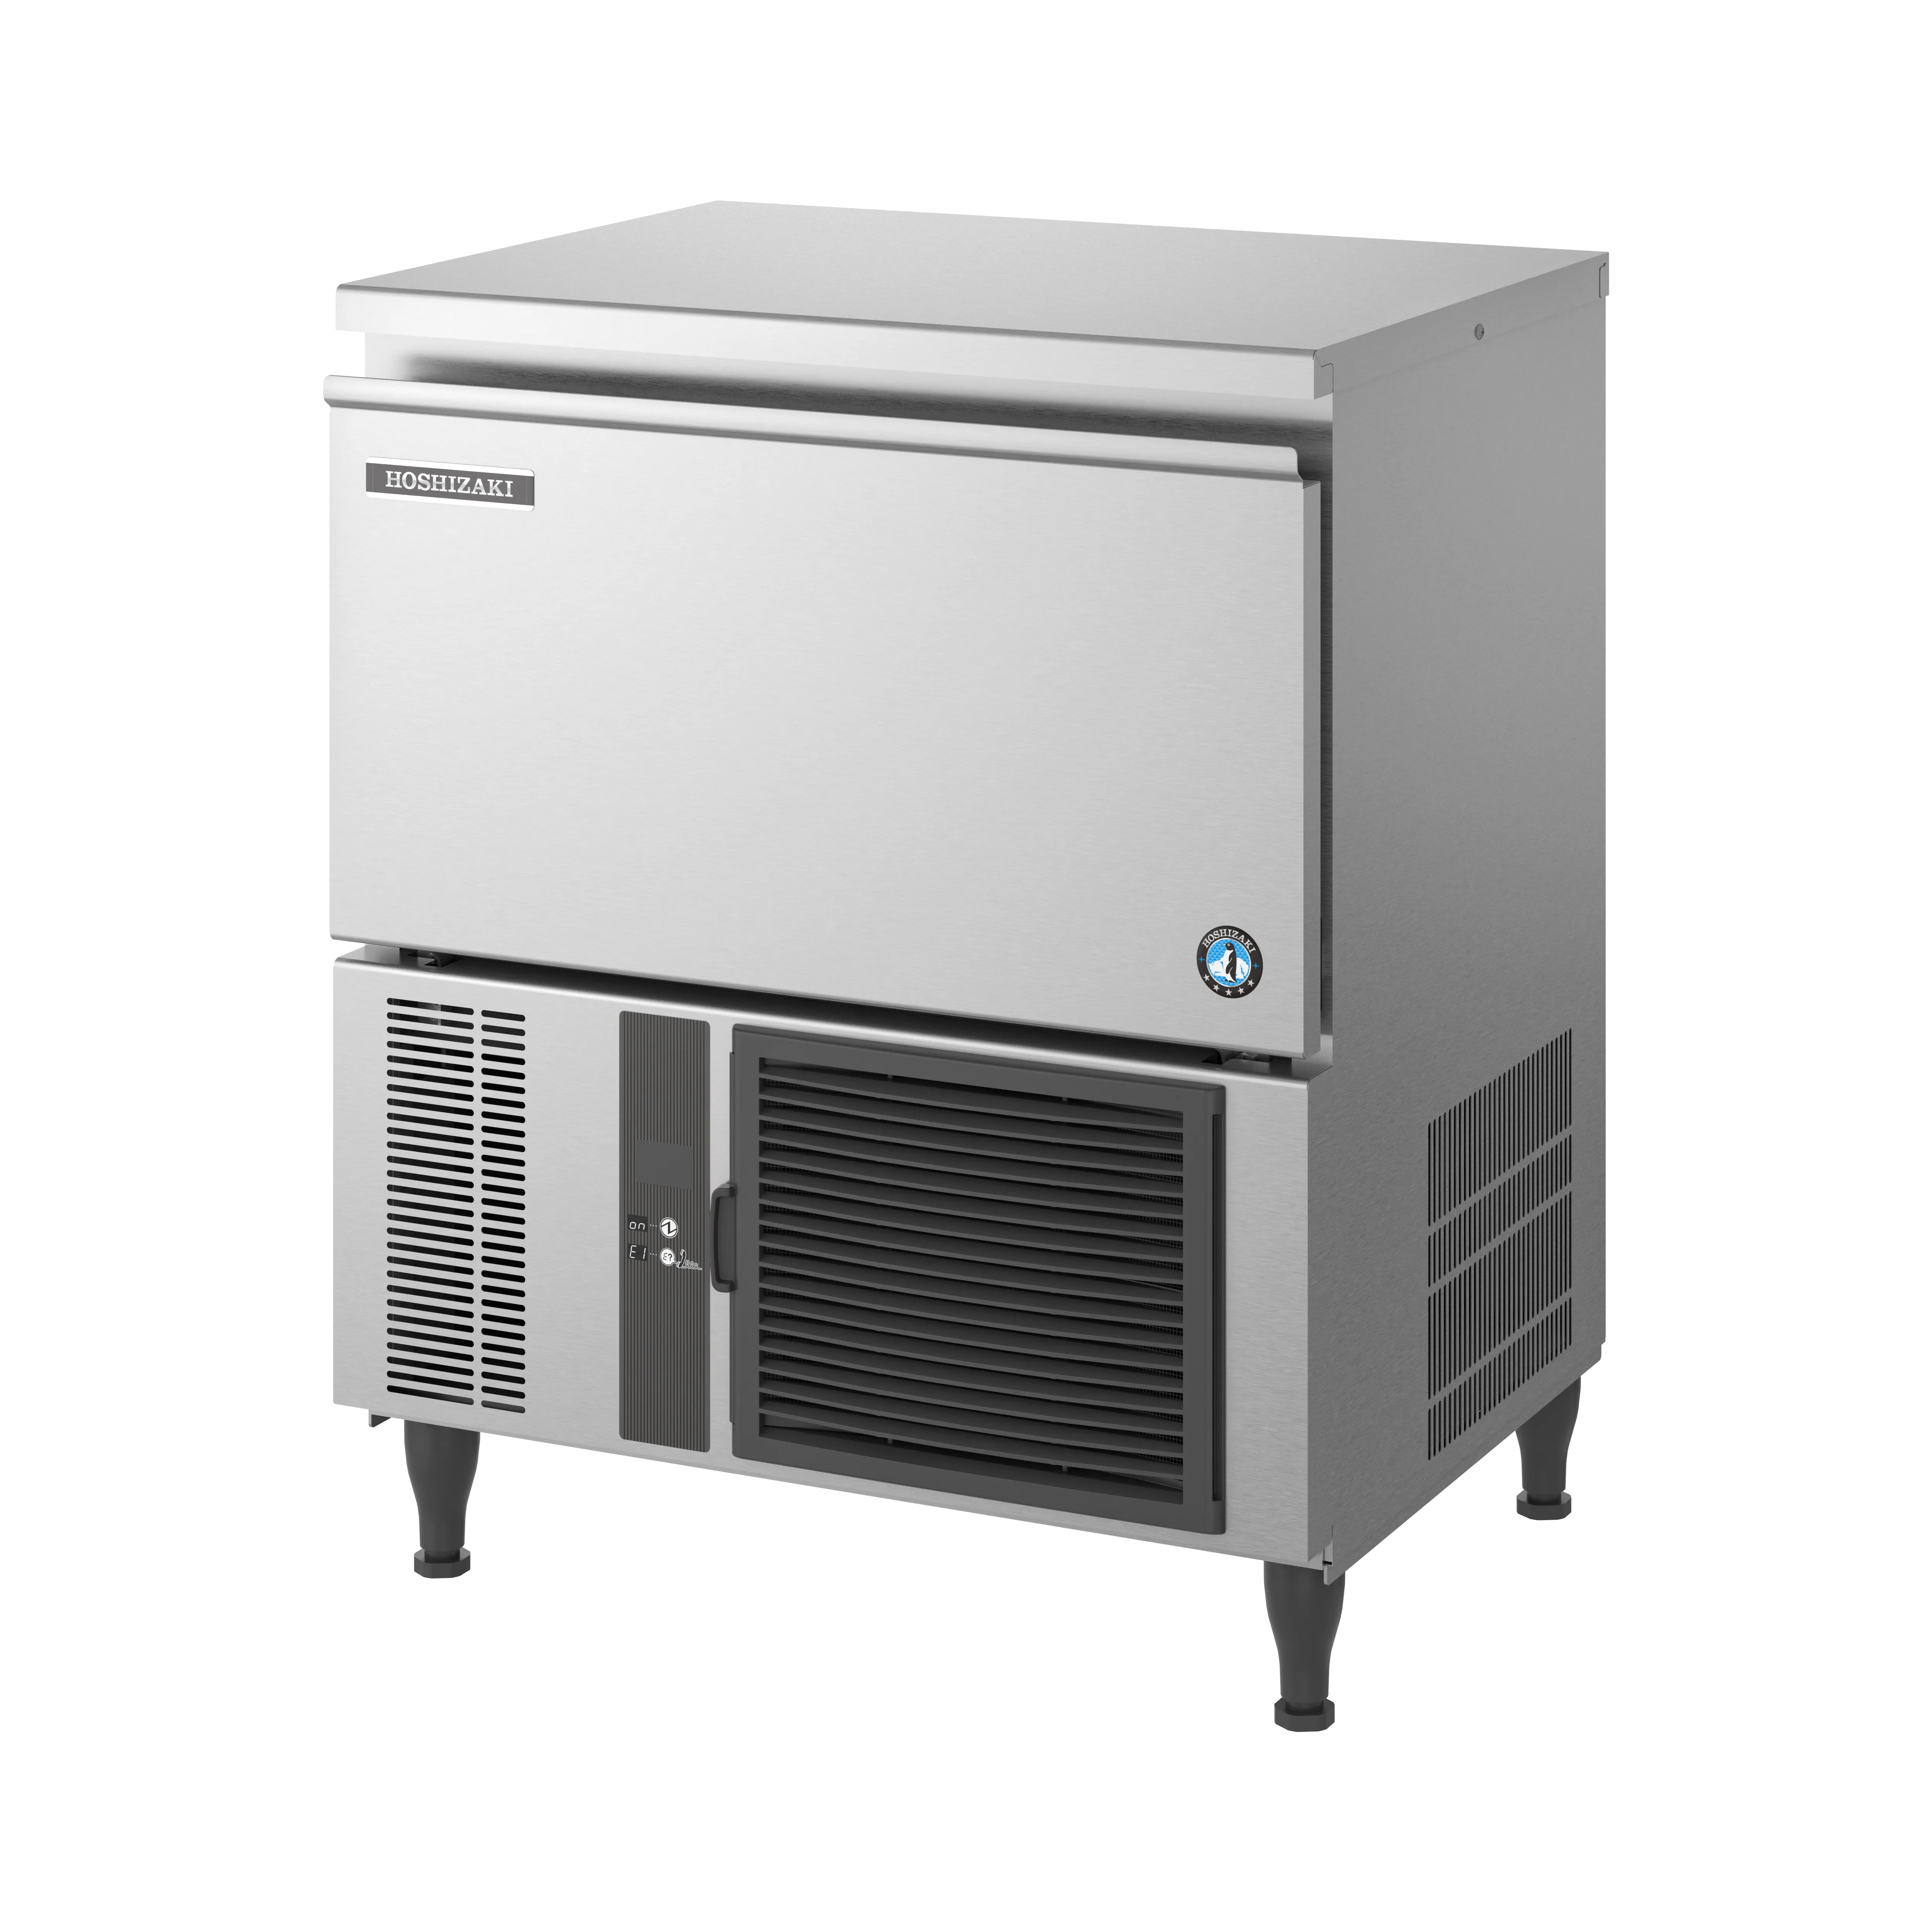 Hoshizaki IM-45CNE-25 Self Contained Cube Ice Maker, 39kg/24hrs